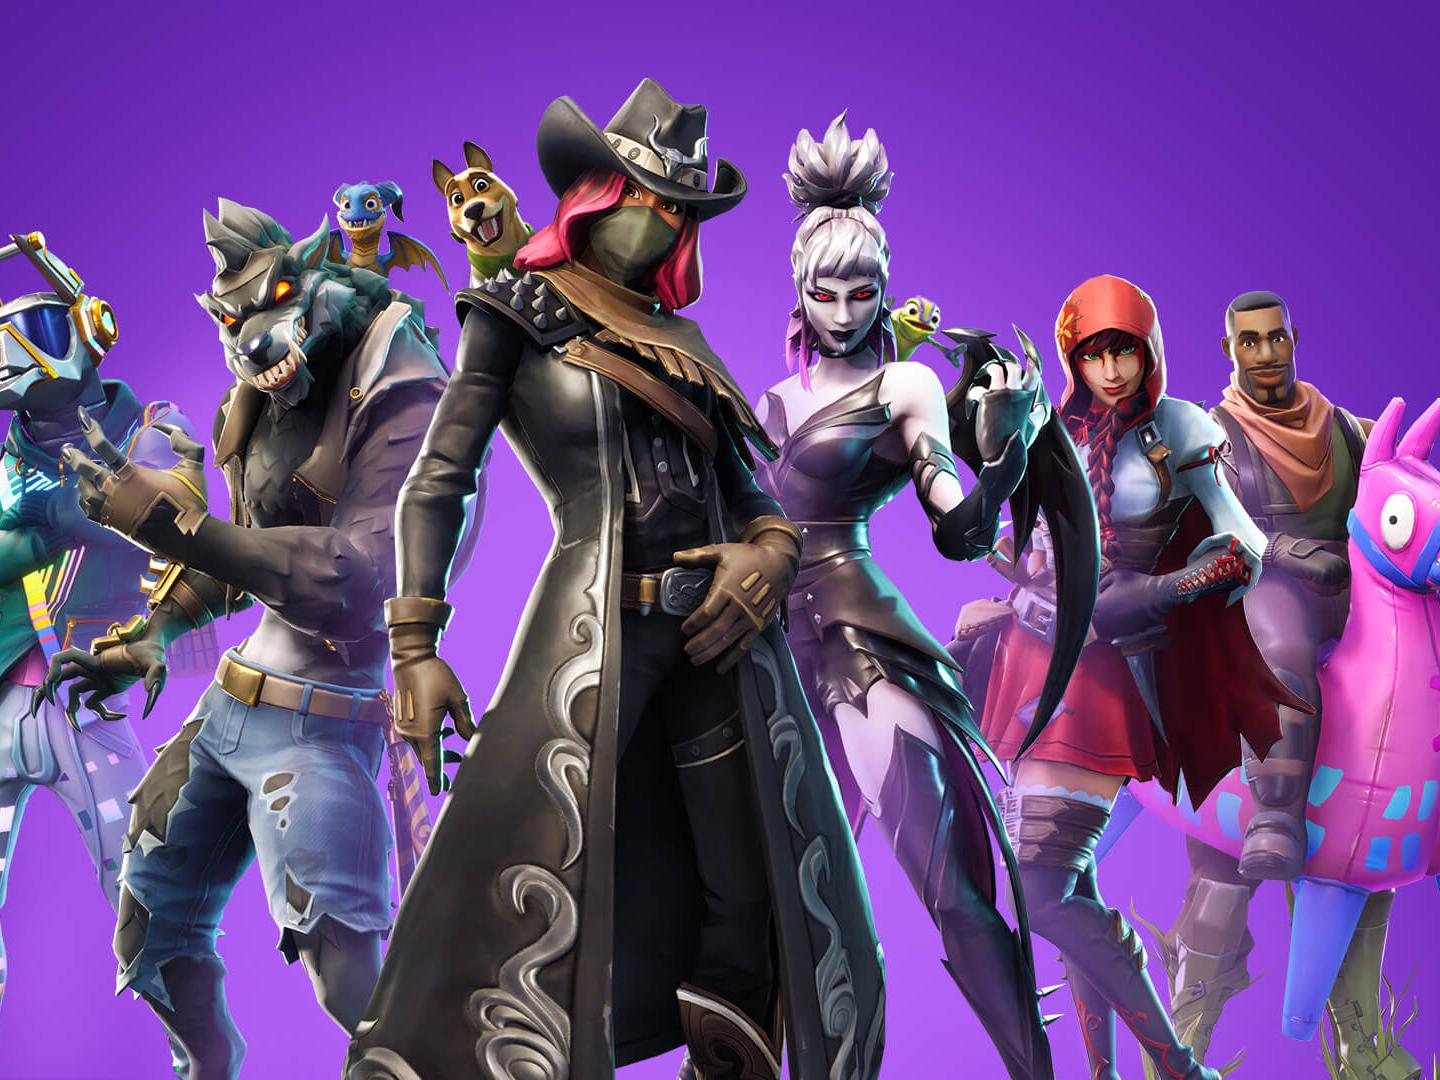 Fortnite More Than 200 Million People Have Now Played Battle Royale - fortnite more than 200 million people have now played battle royale game